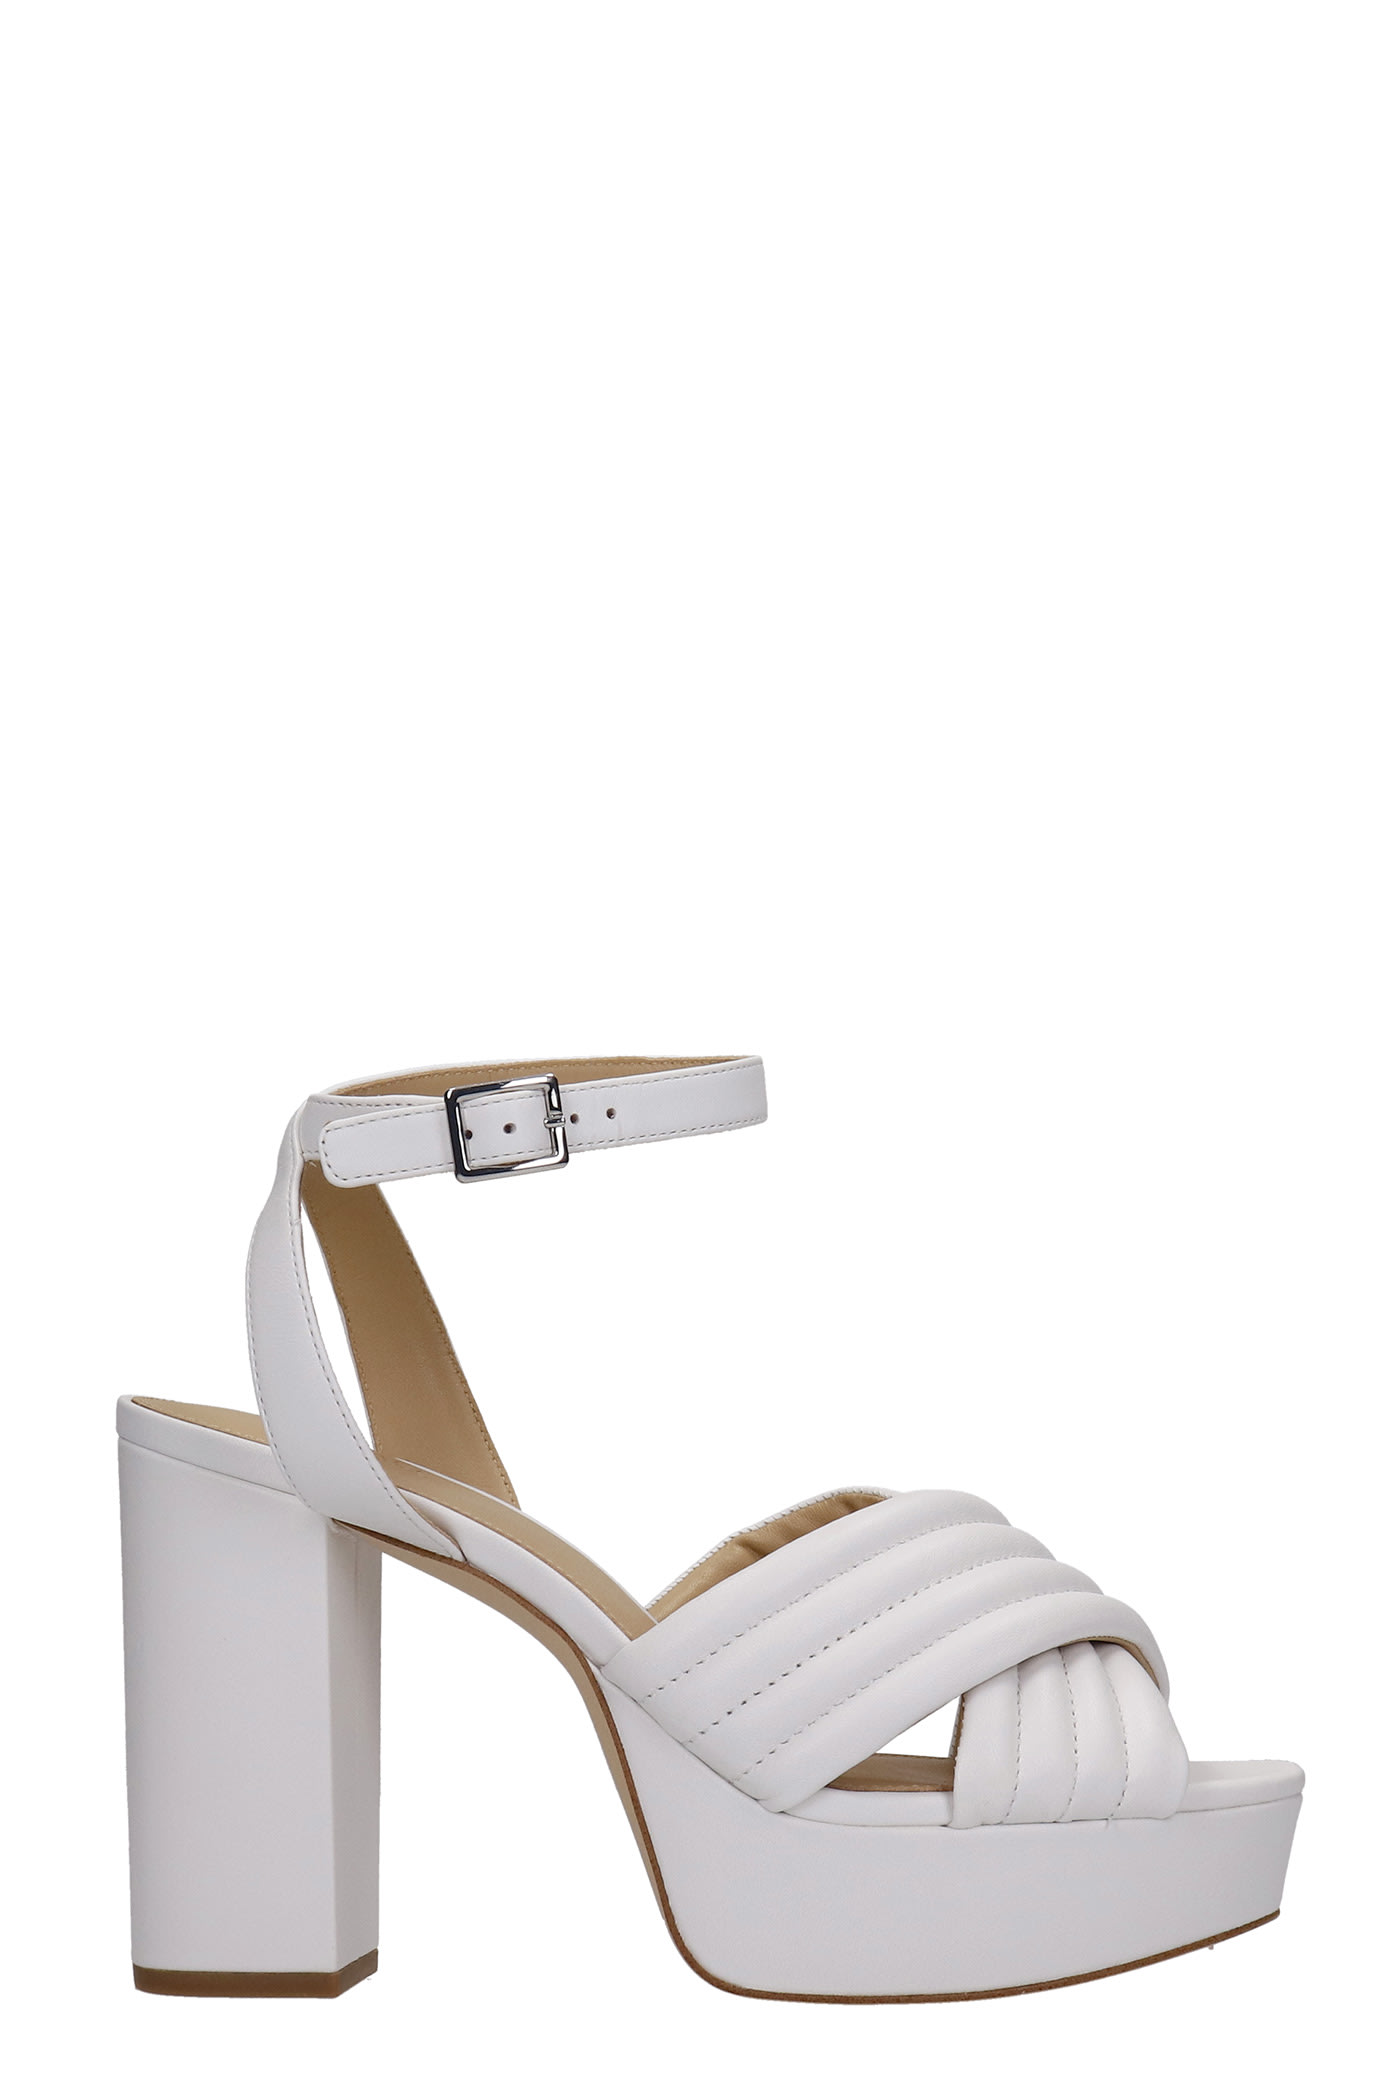 Michael Kors Sandals In White Leather